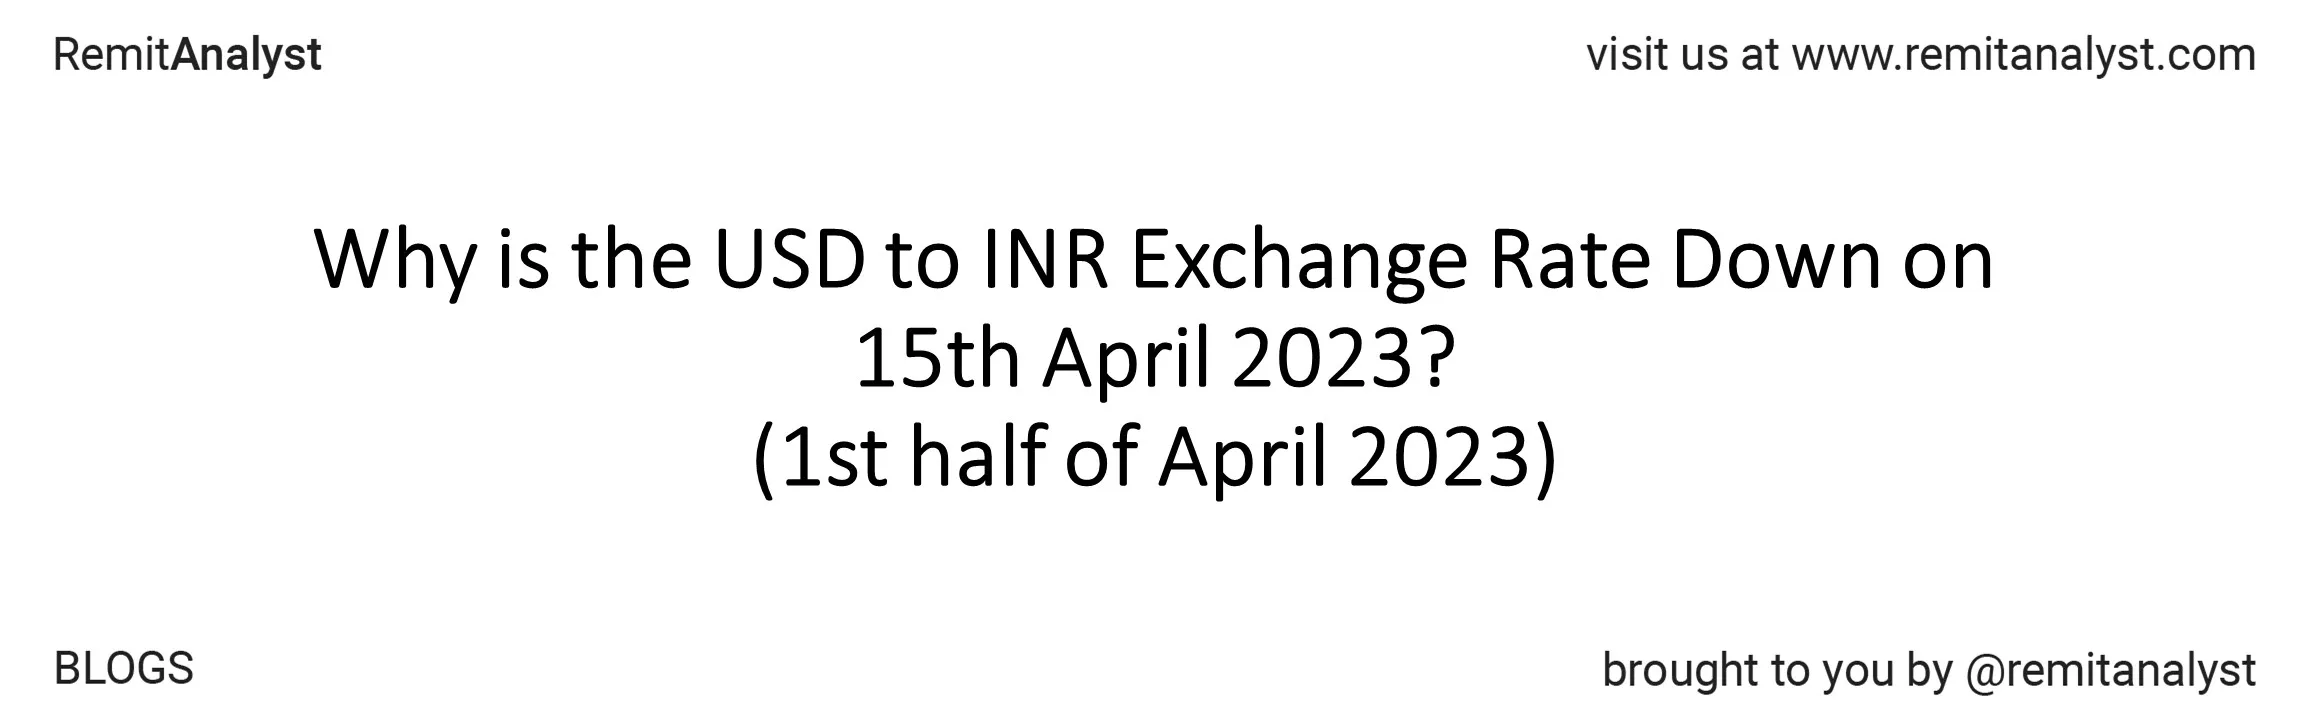 usd-to-inr-exchange-rate-3-apr-2023-to-15-apr-2023-title